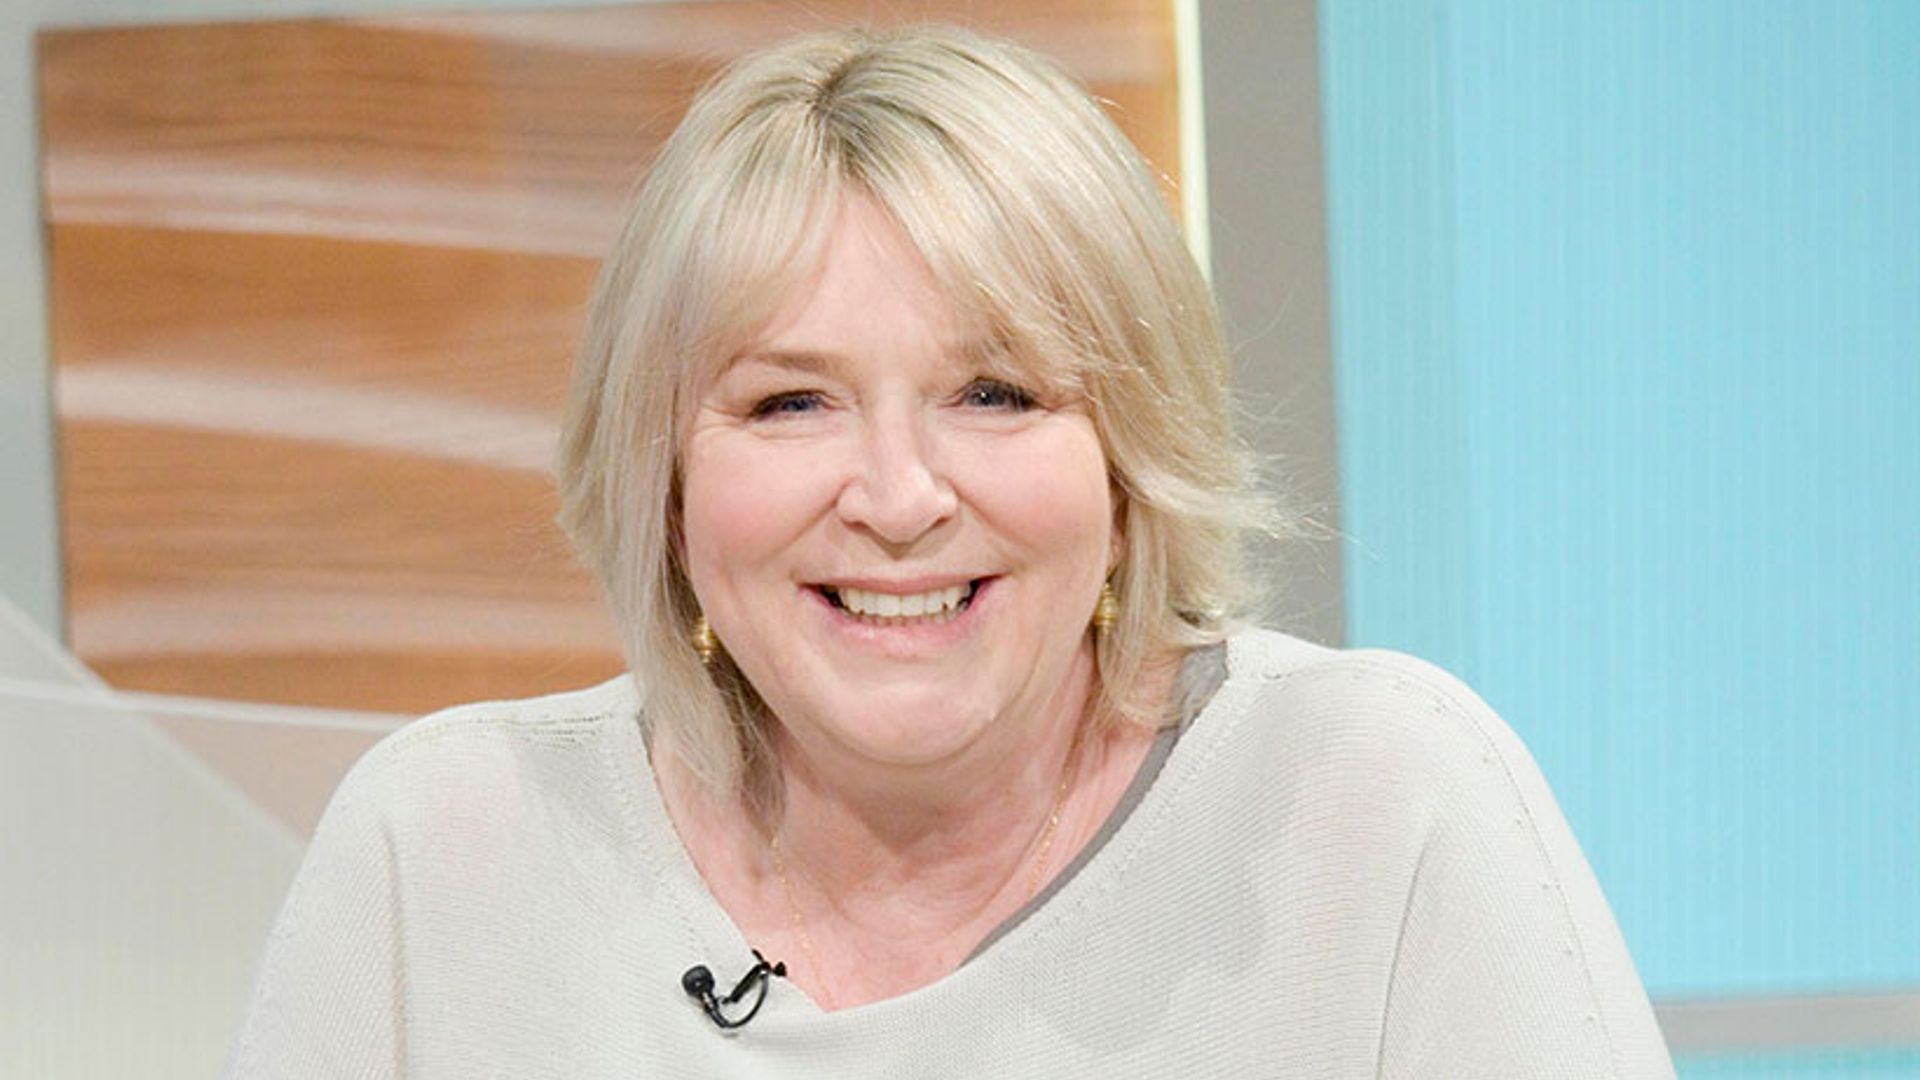 Fern Britton still hasn’t made a full recovery from illness that nearly killed her